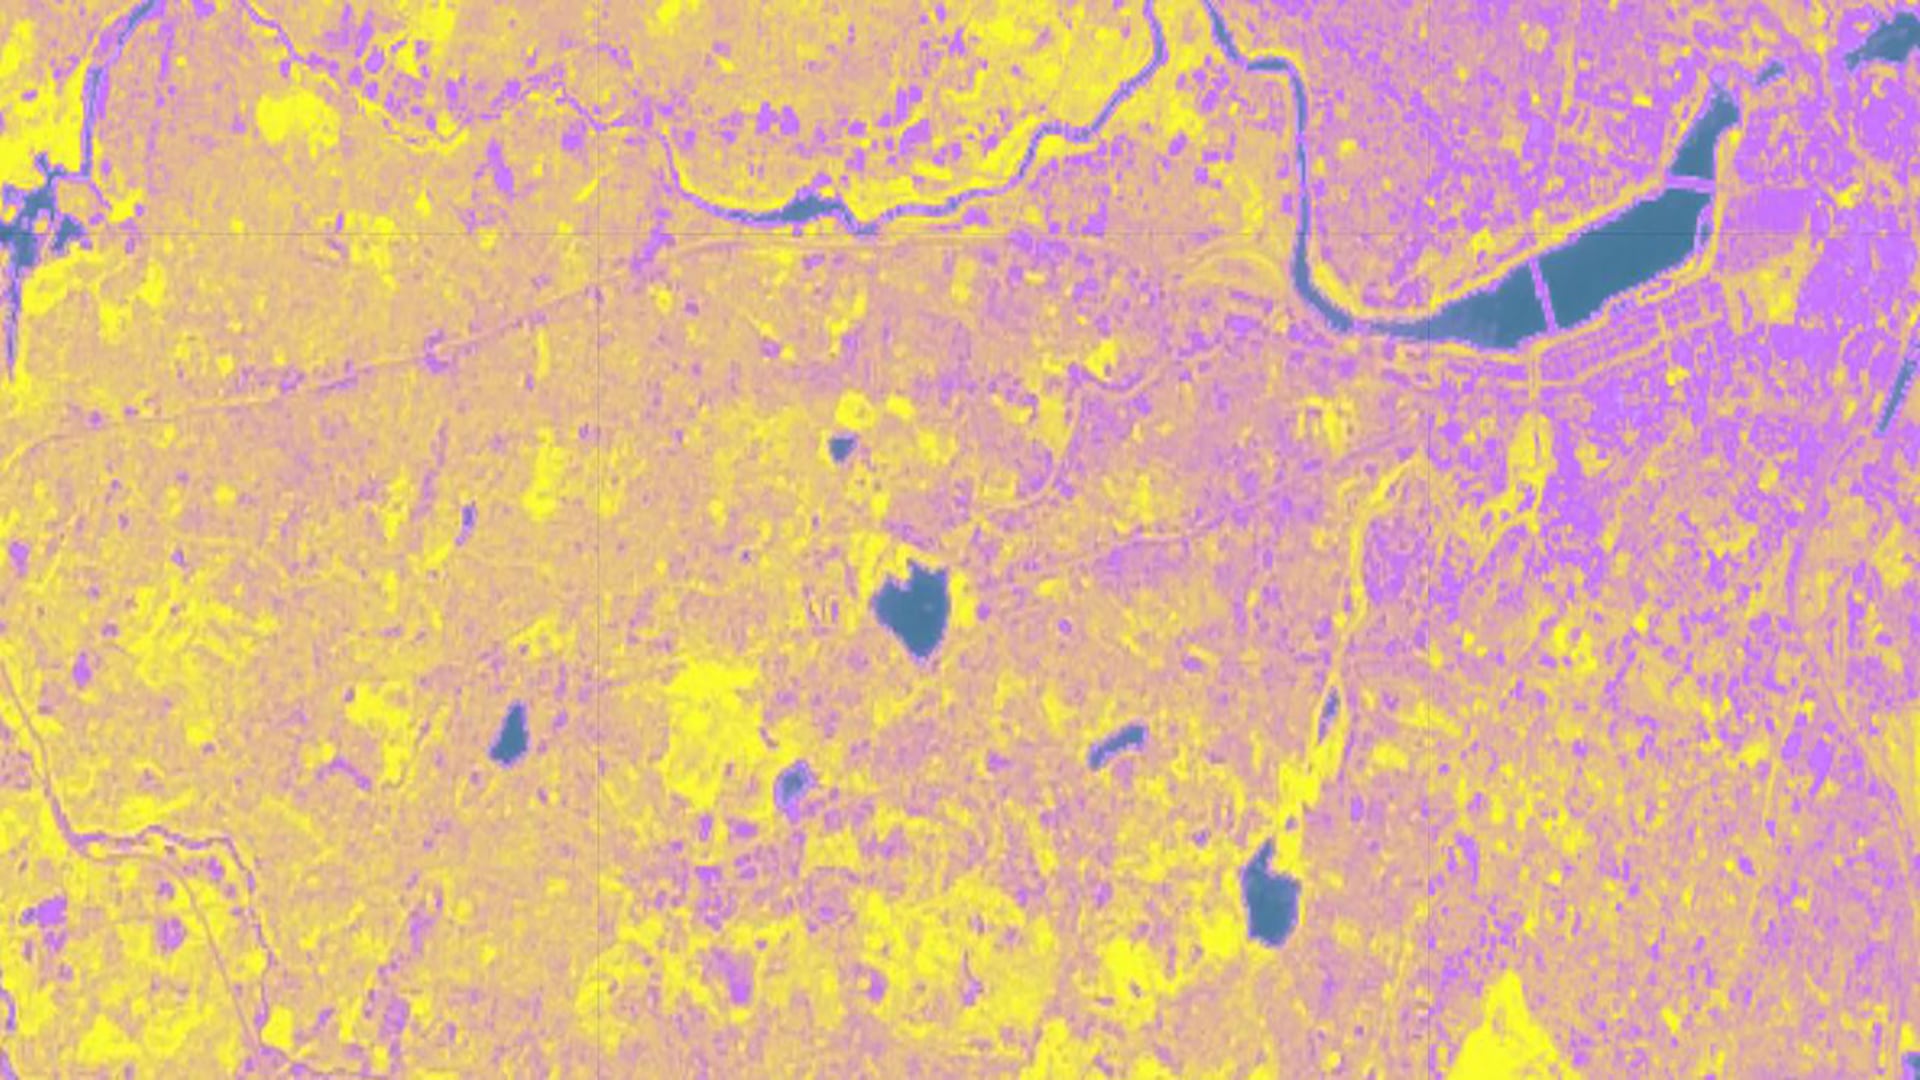 MNDWI calculated from January 1- October 25th, 2020 Landsat 8 OLI imagery using green and short-wave infrared bands (B3 & B5). The image shows the eastern portion of the Charles River watershed, which includes the Boston metro area. Dark blue shades indicate open water features, purple indicates built-up land cover, and yellow indicates vegetation. Flooding will be more prominent near open water features and should be considered during development and resiliency planning. Keywords: MNDWI, Landsat 8, Water, Charles River Watershed, Boston, Trista Brophy, Willow Coleman, Anna Garik, Will Peters